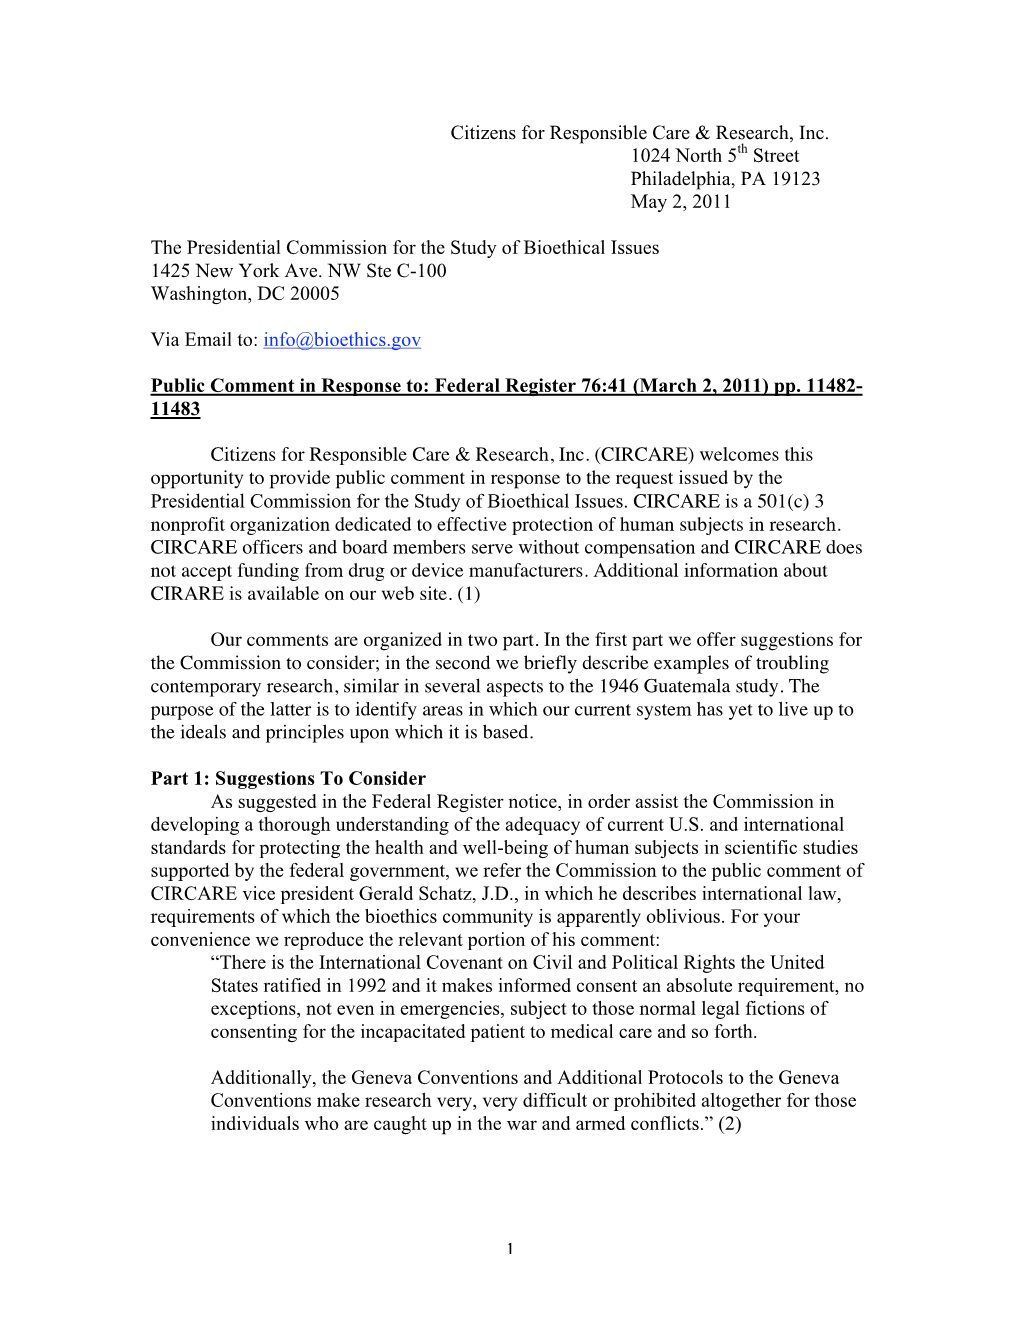 Citizens for Responsible Care & Research, Inc. Public Comments to the Presidential Commission for the Study of Bioethical Is